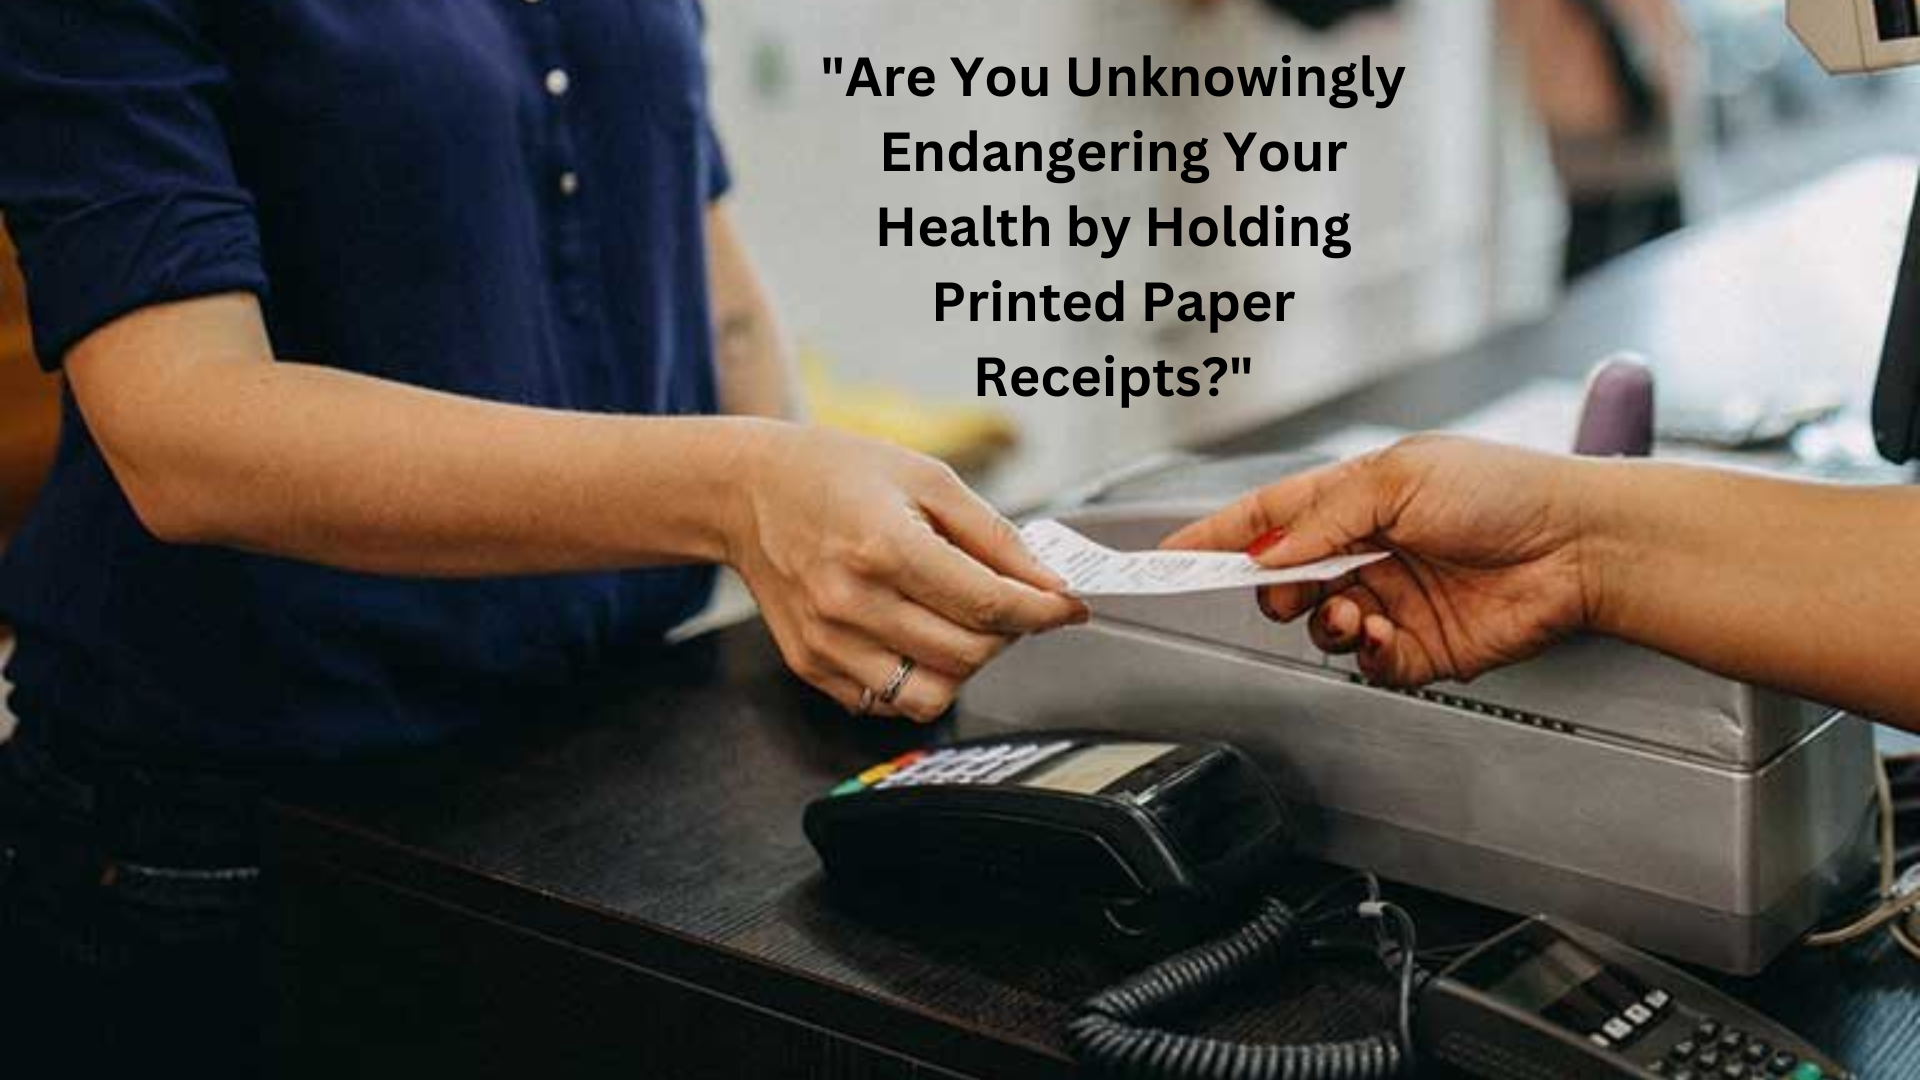 Are Printed Paper Receipts A Silent Threat To Your Health?